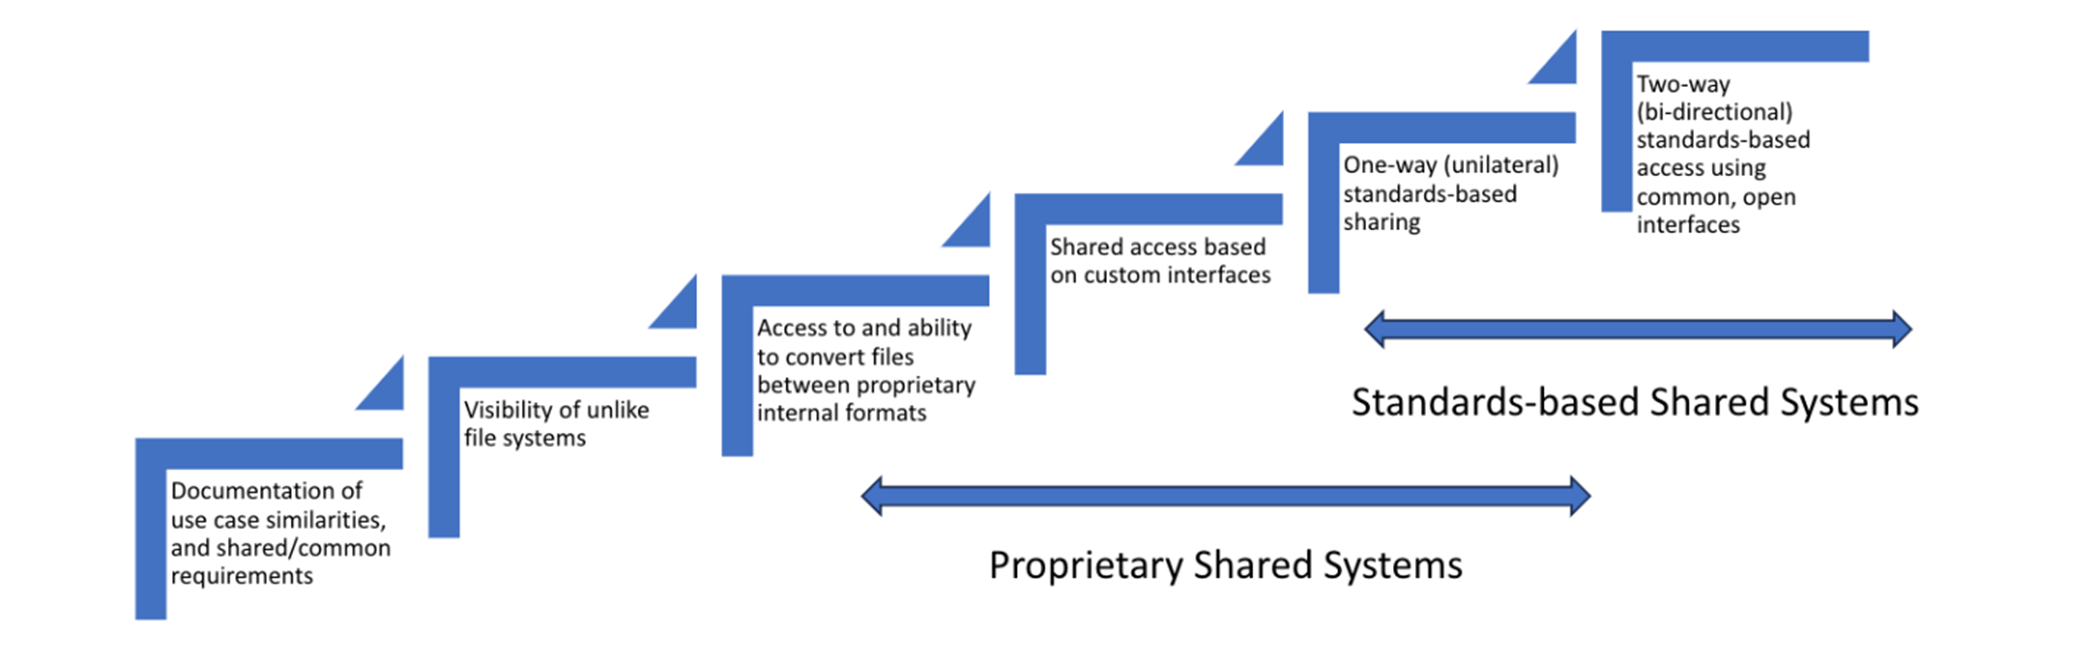 Interoperability continuum and the place of interoperability standards